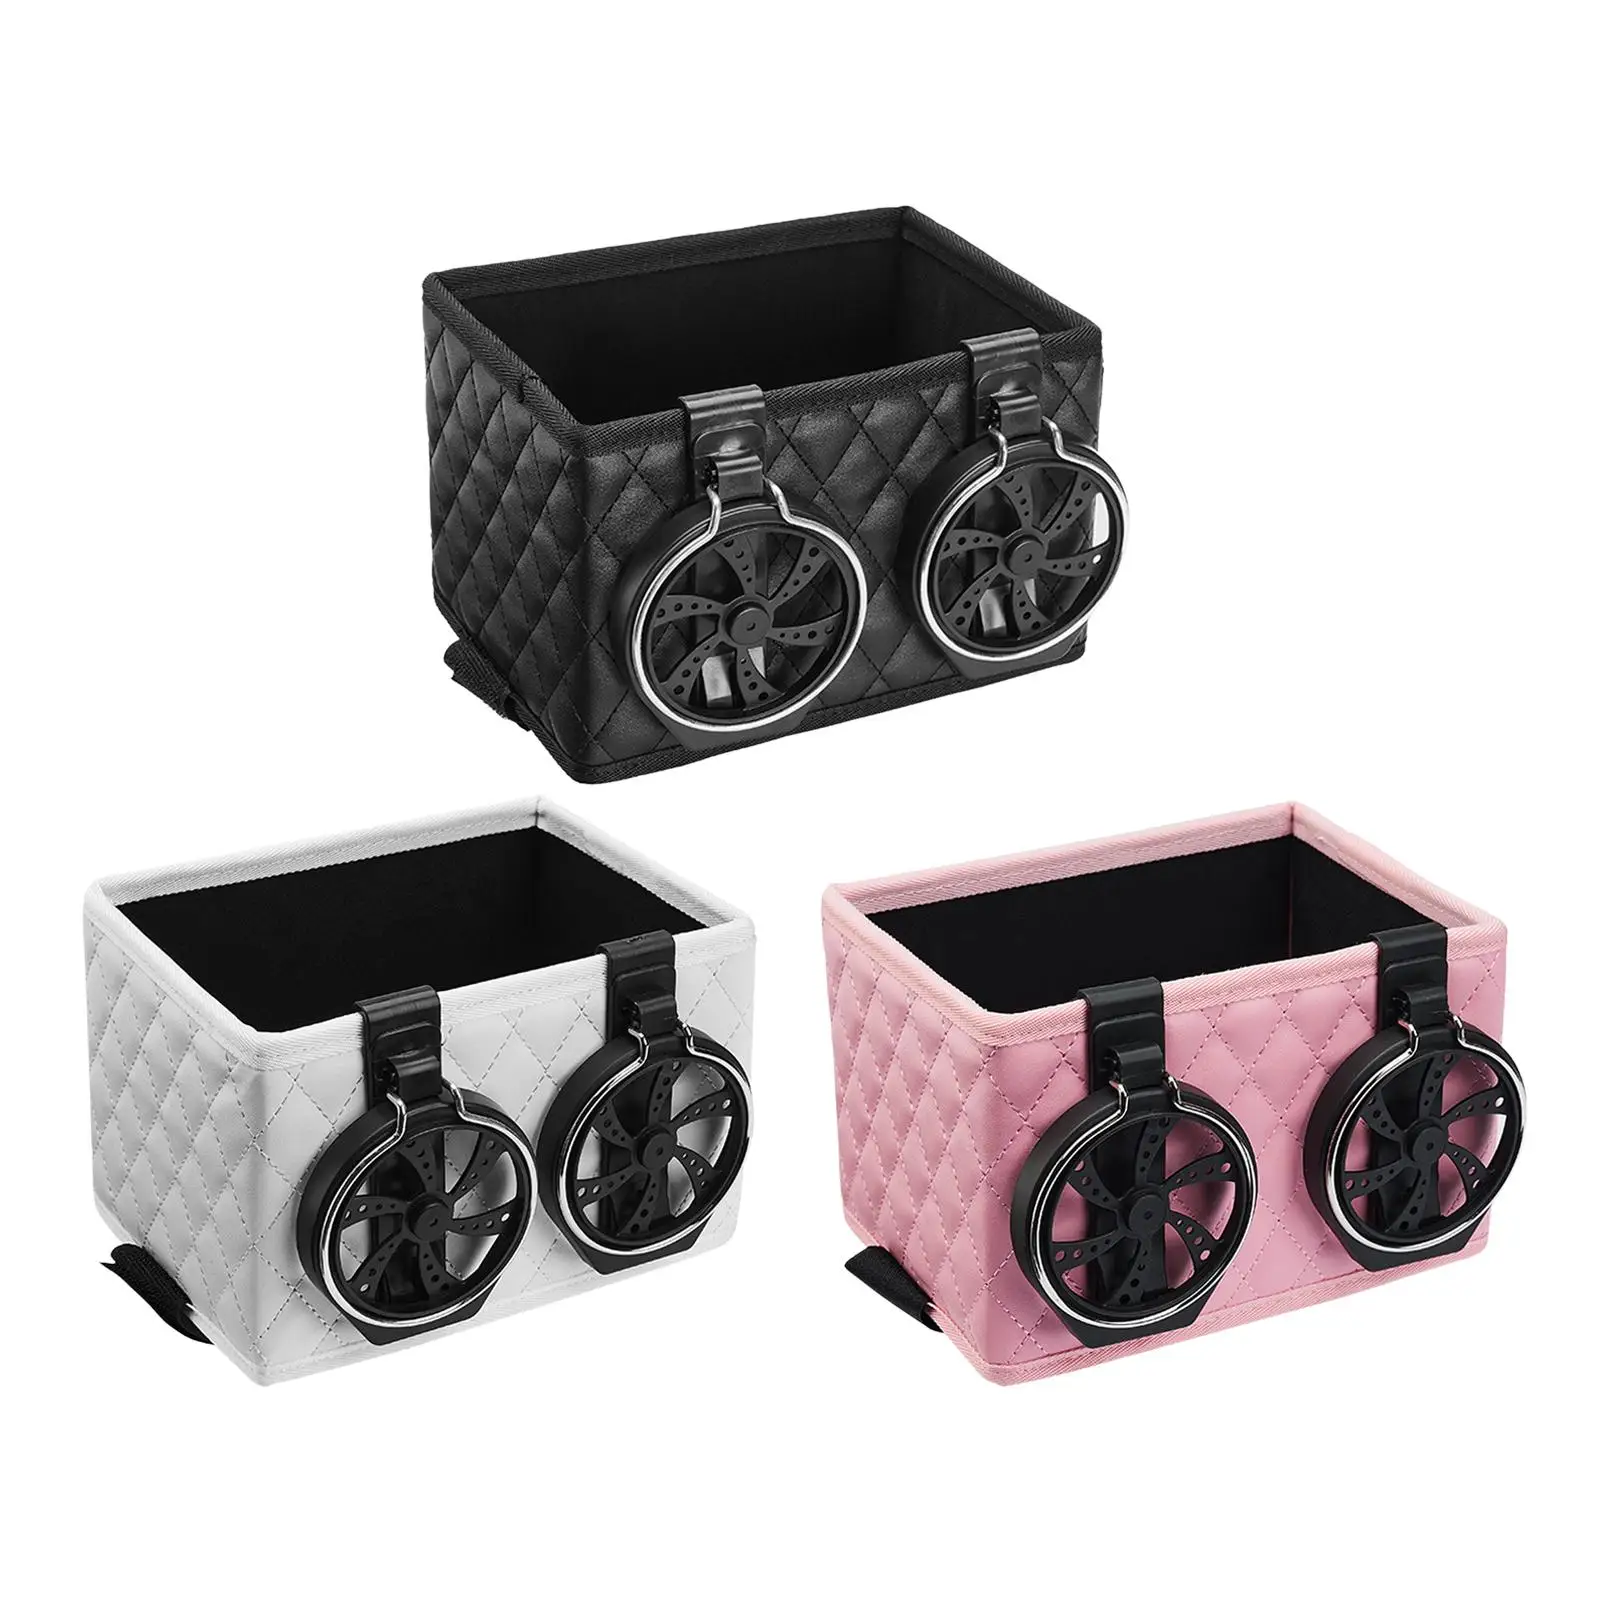 Car Storage Box car Storage Foldable Cup Holder for Paper Towels